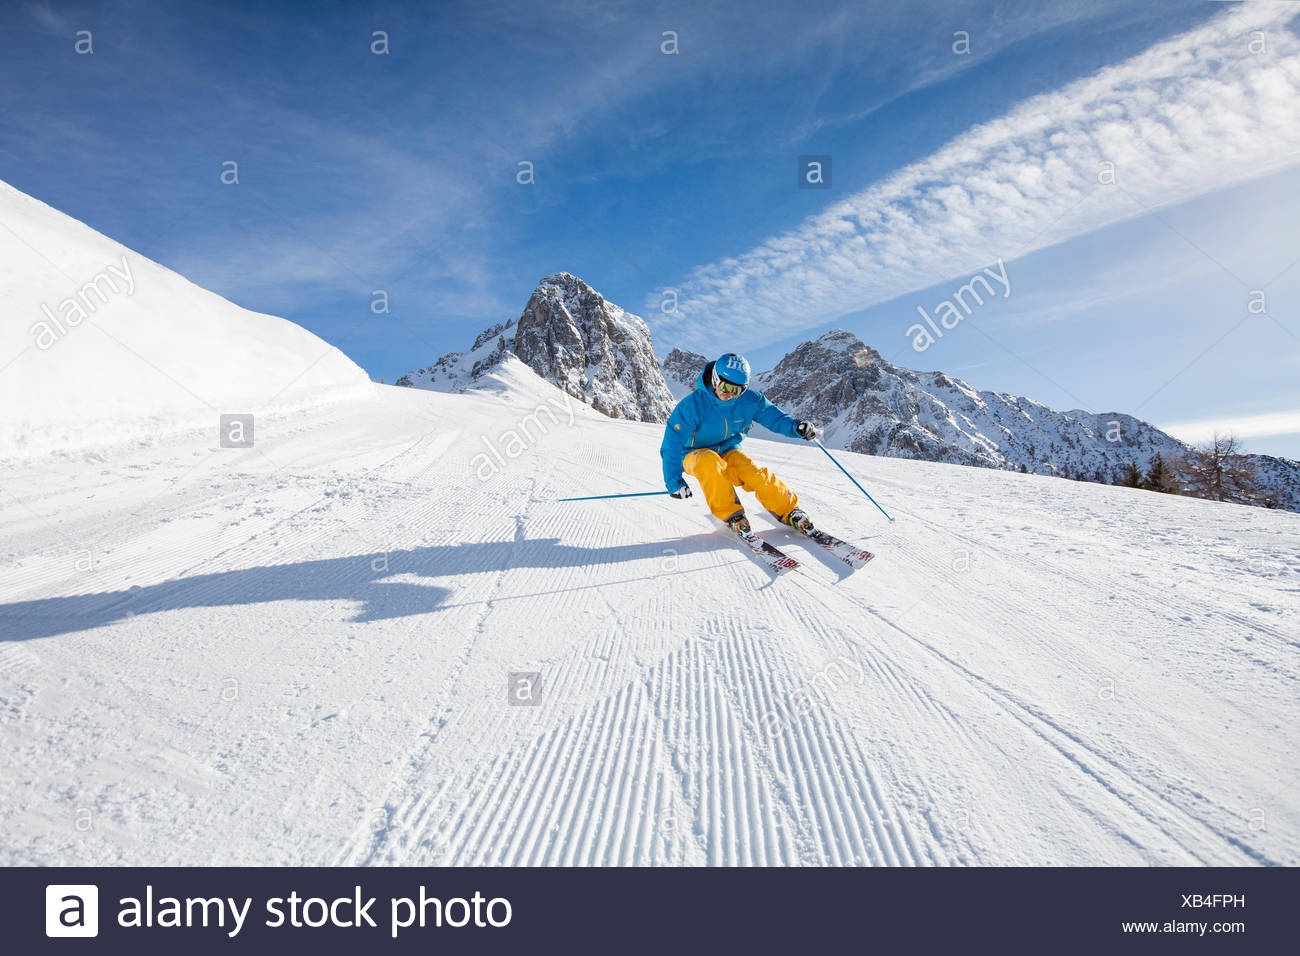 Skier with a helmet skiing down a slope, Mutterer Alm near ...